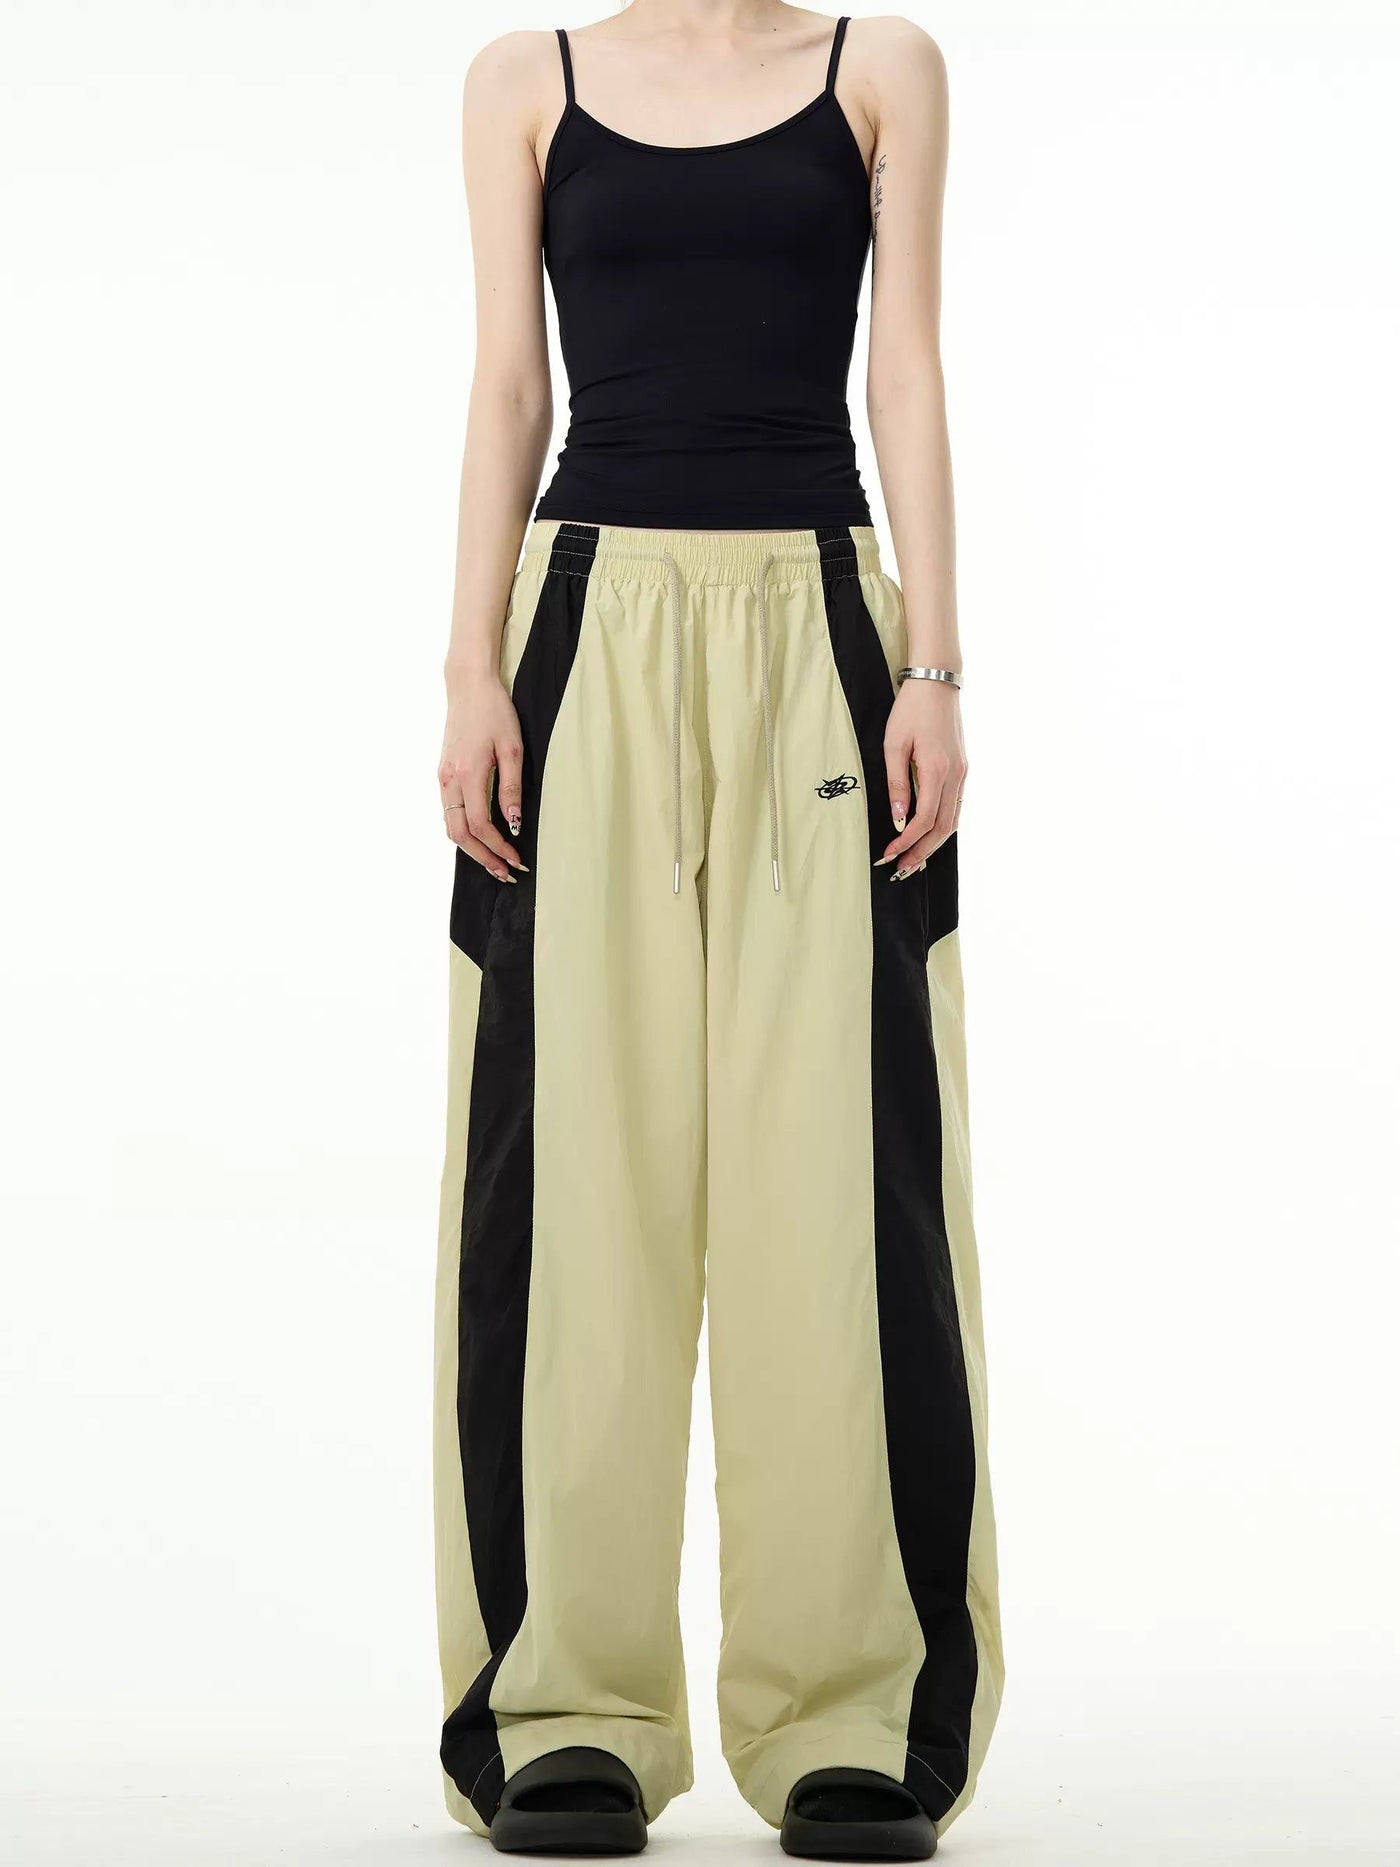 Contrast Bar Line Sweatpants Korean Street Fashion Pants By Mad Witch Shop Online at OH Vault